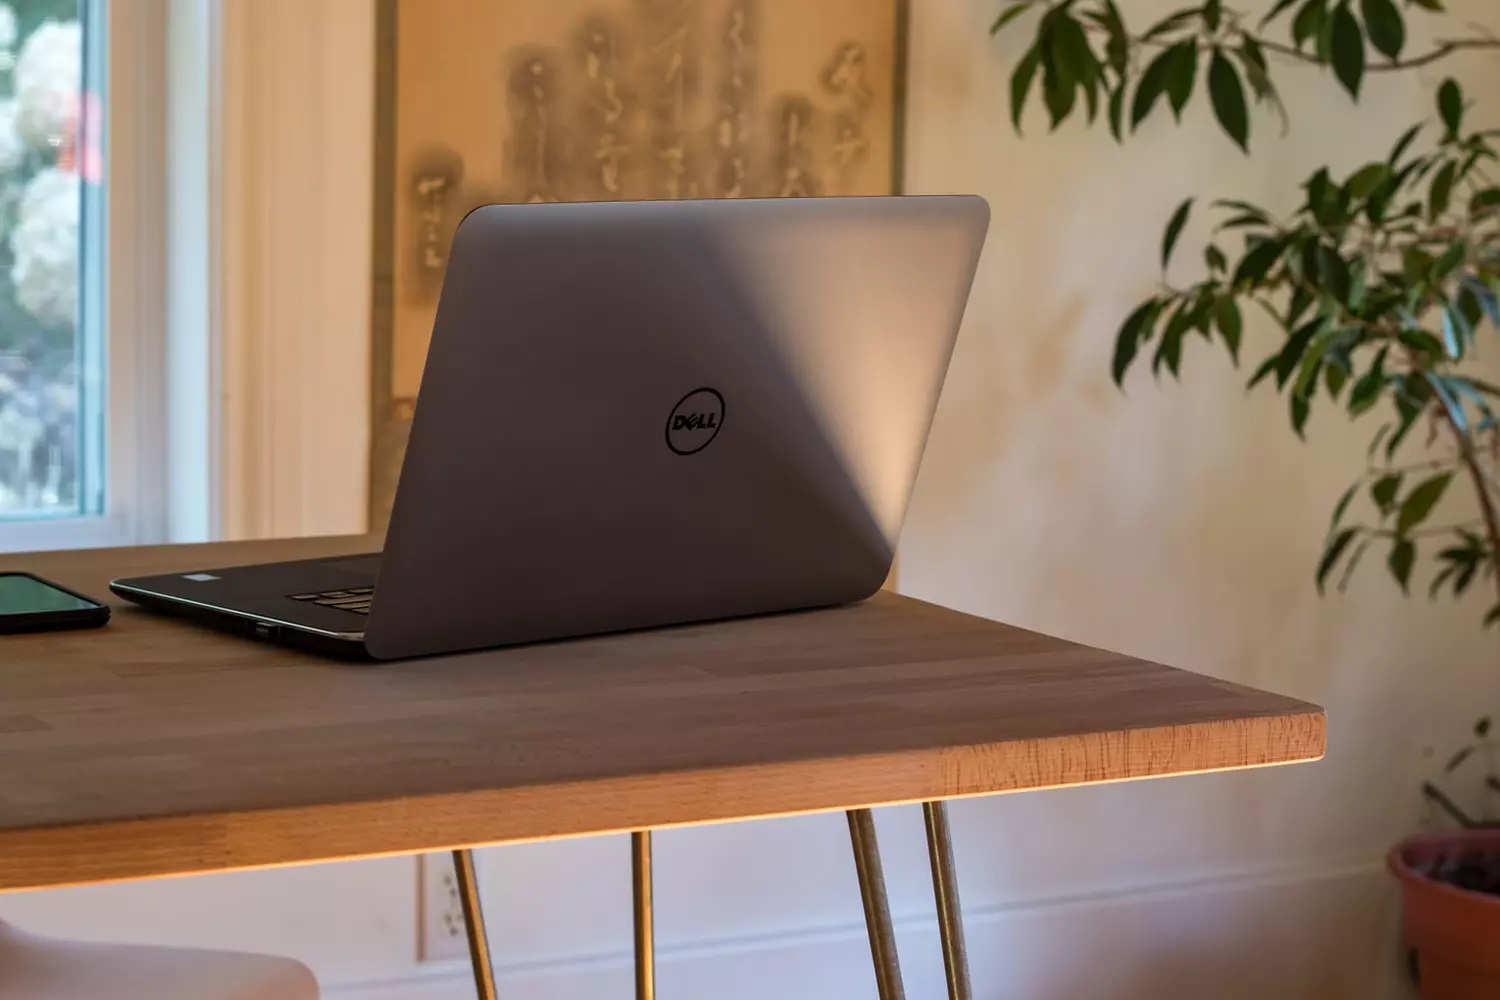 How To Hard Reset Dell Laptop Without Password